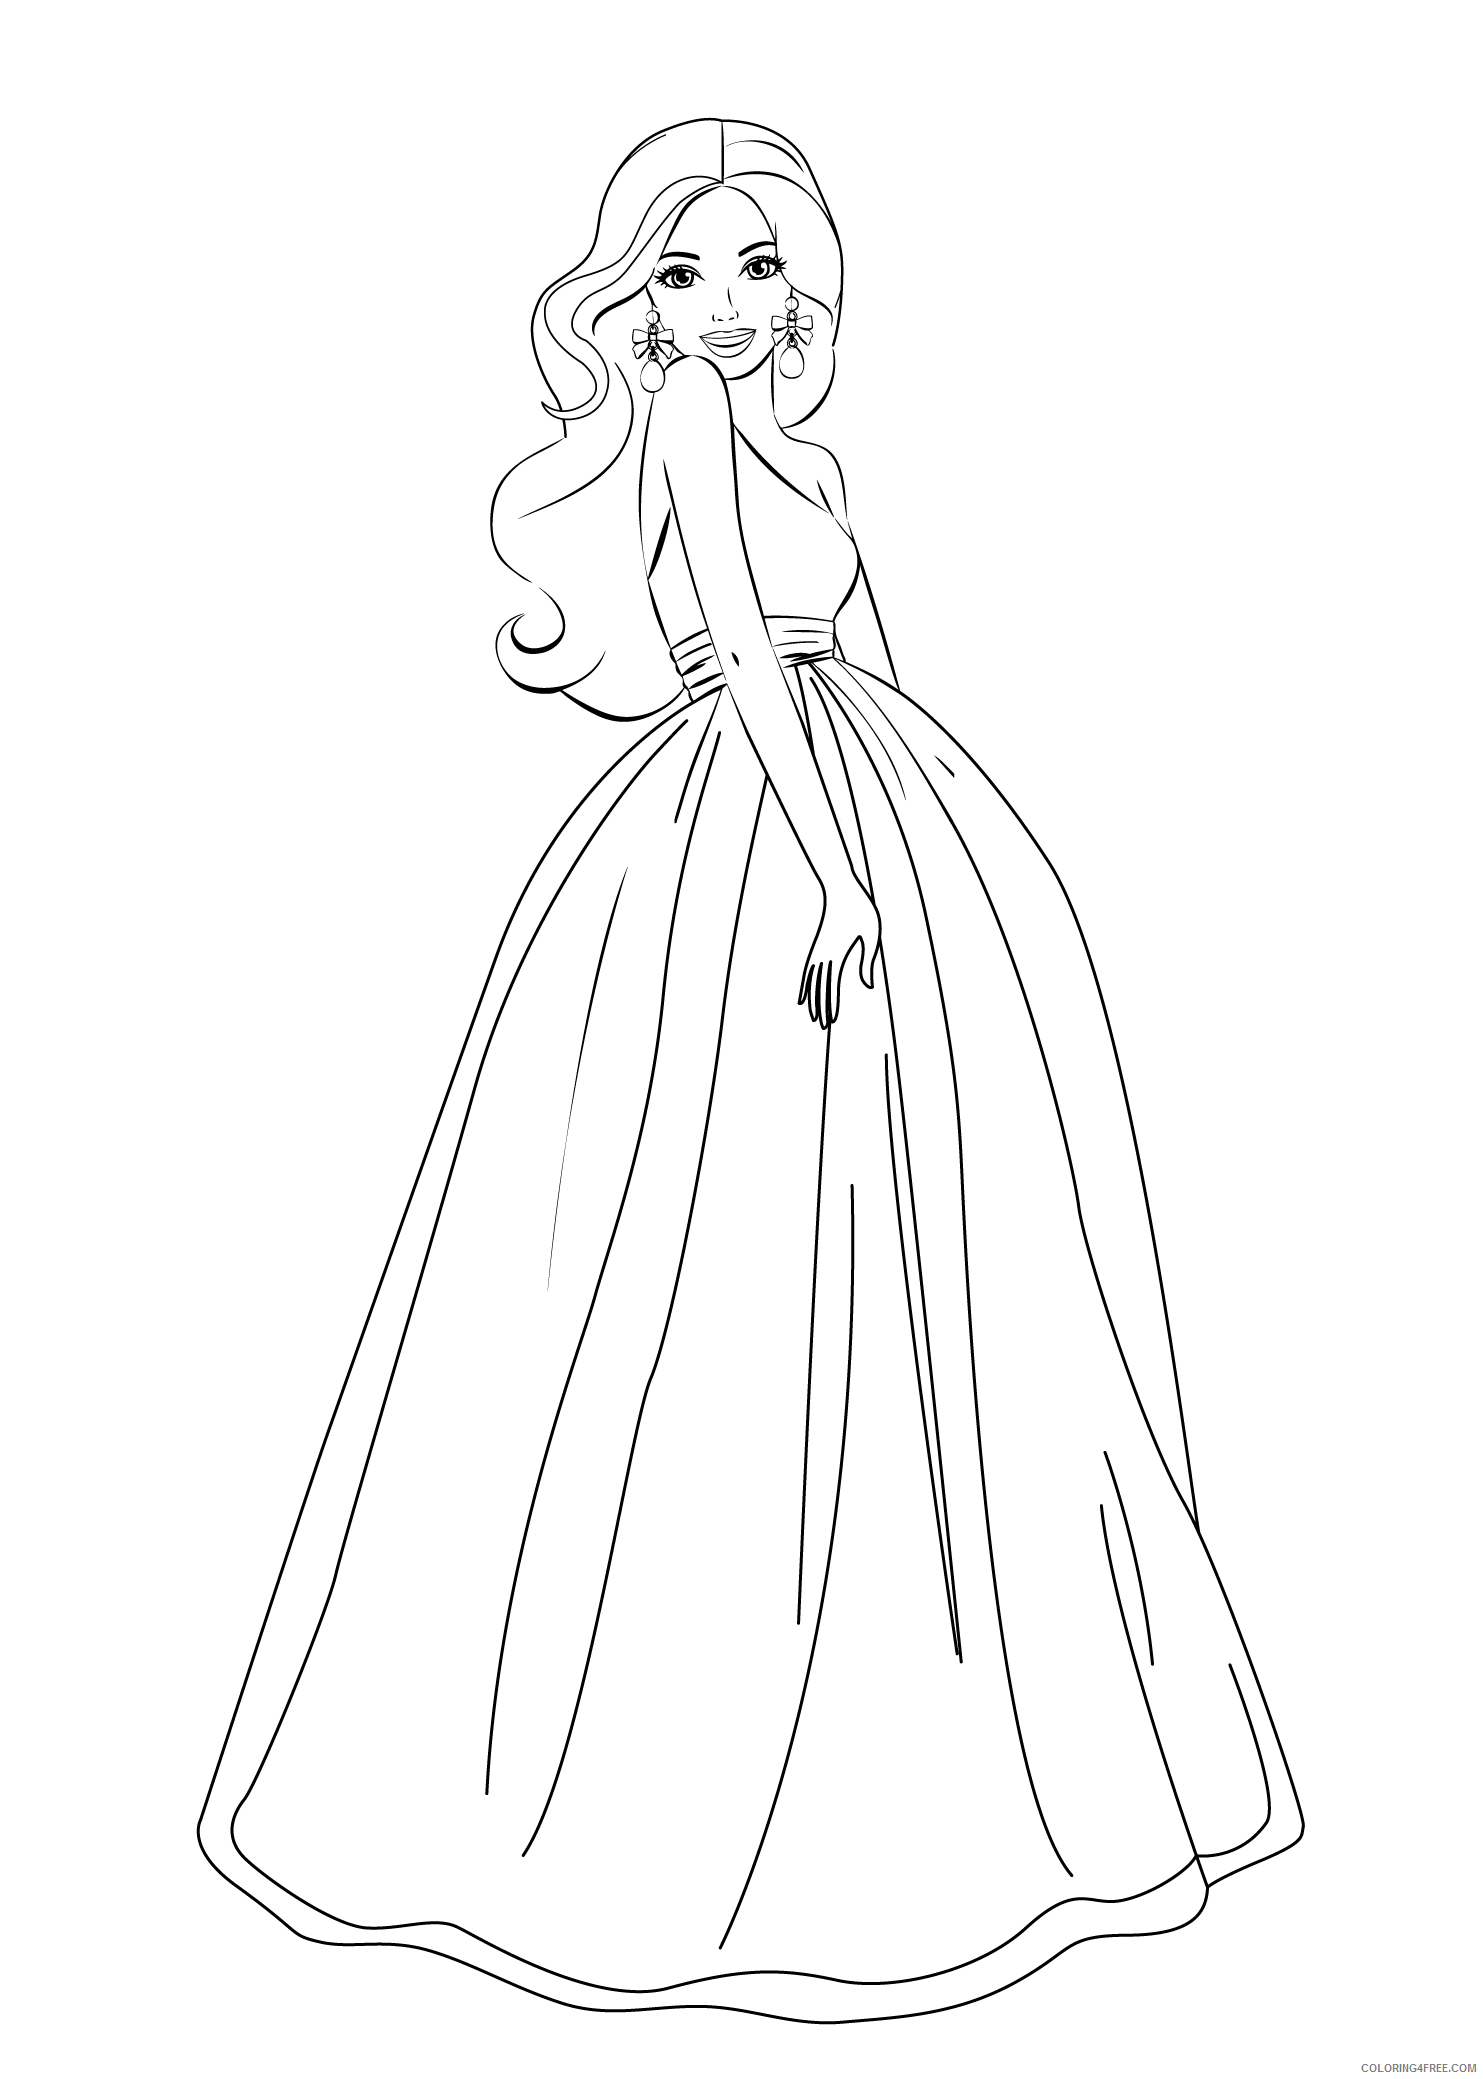 Barbie Coloring Pages Mermaid Tale Coloring4free Coloring4free Com